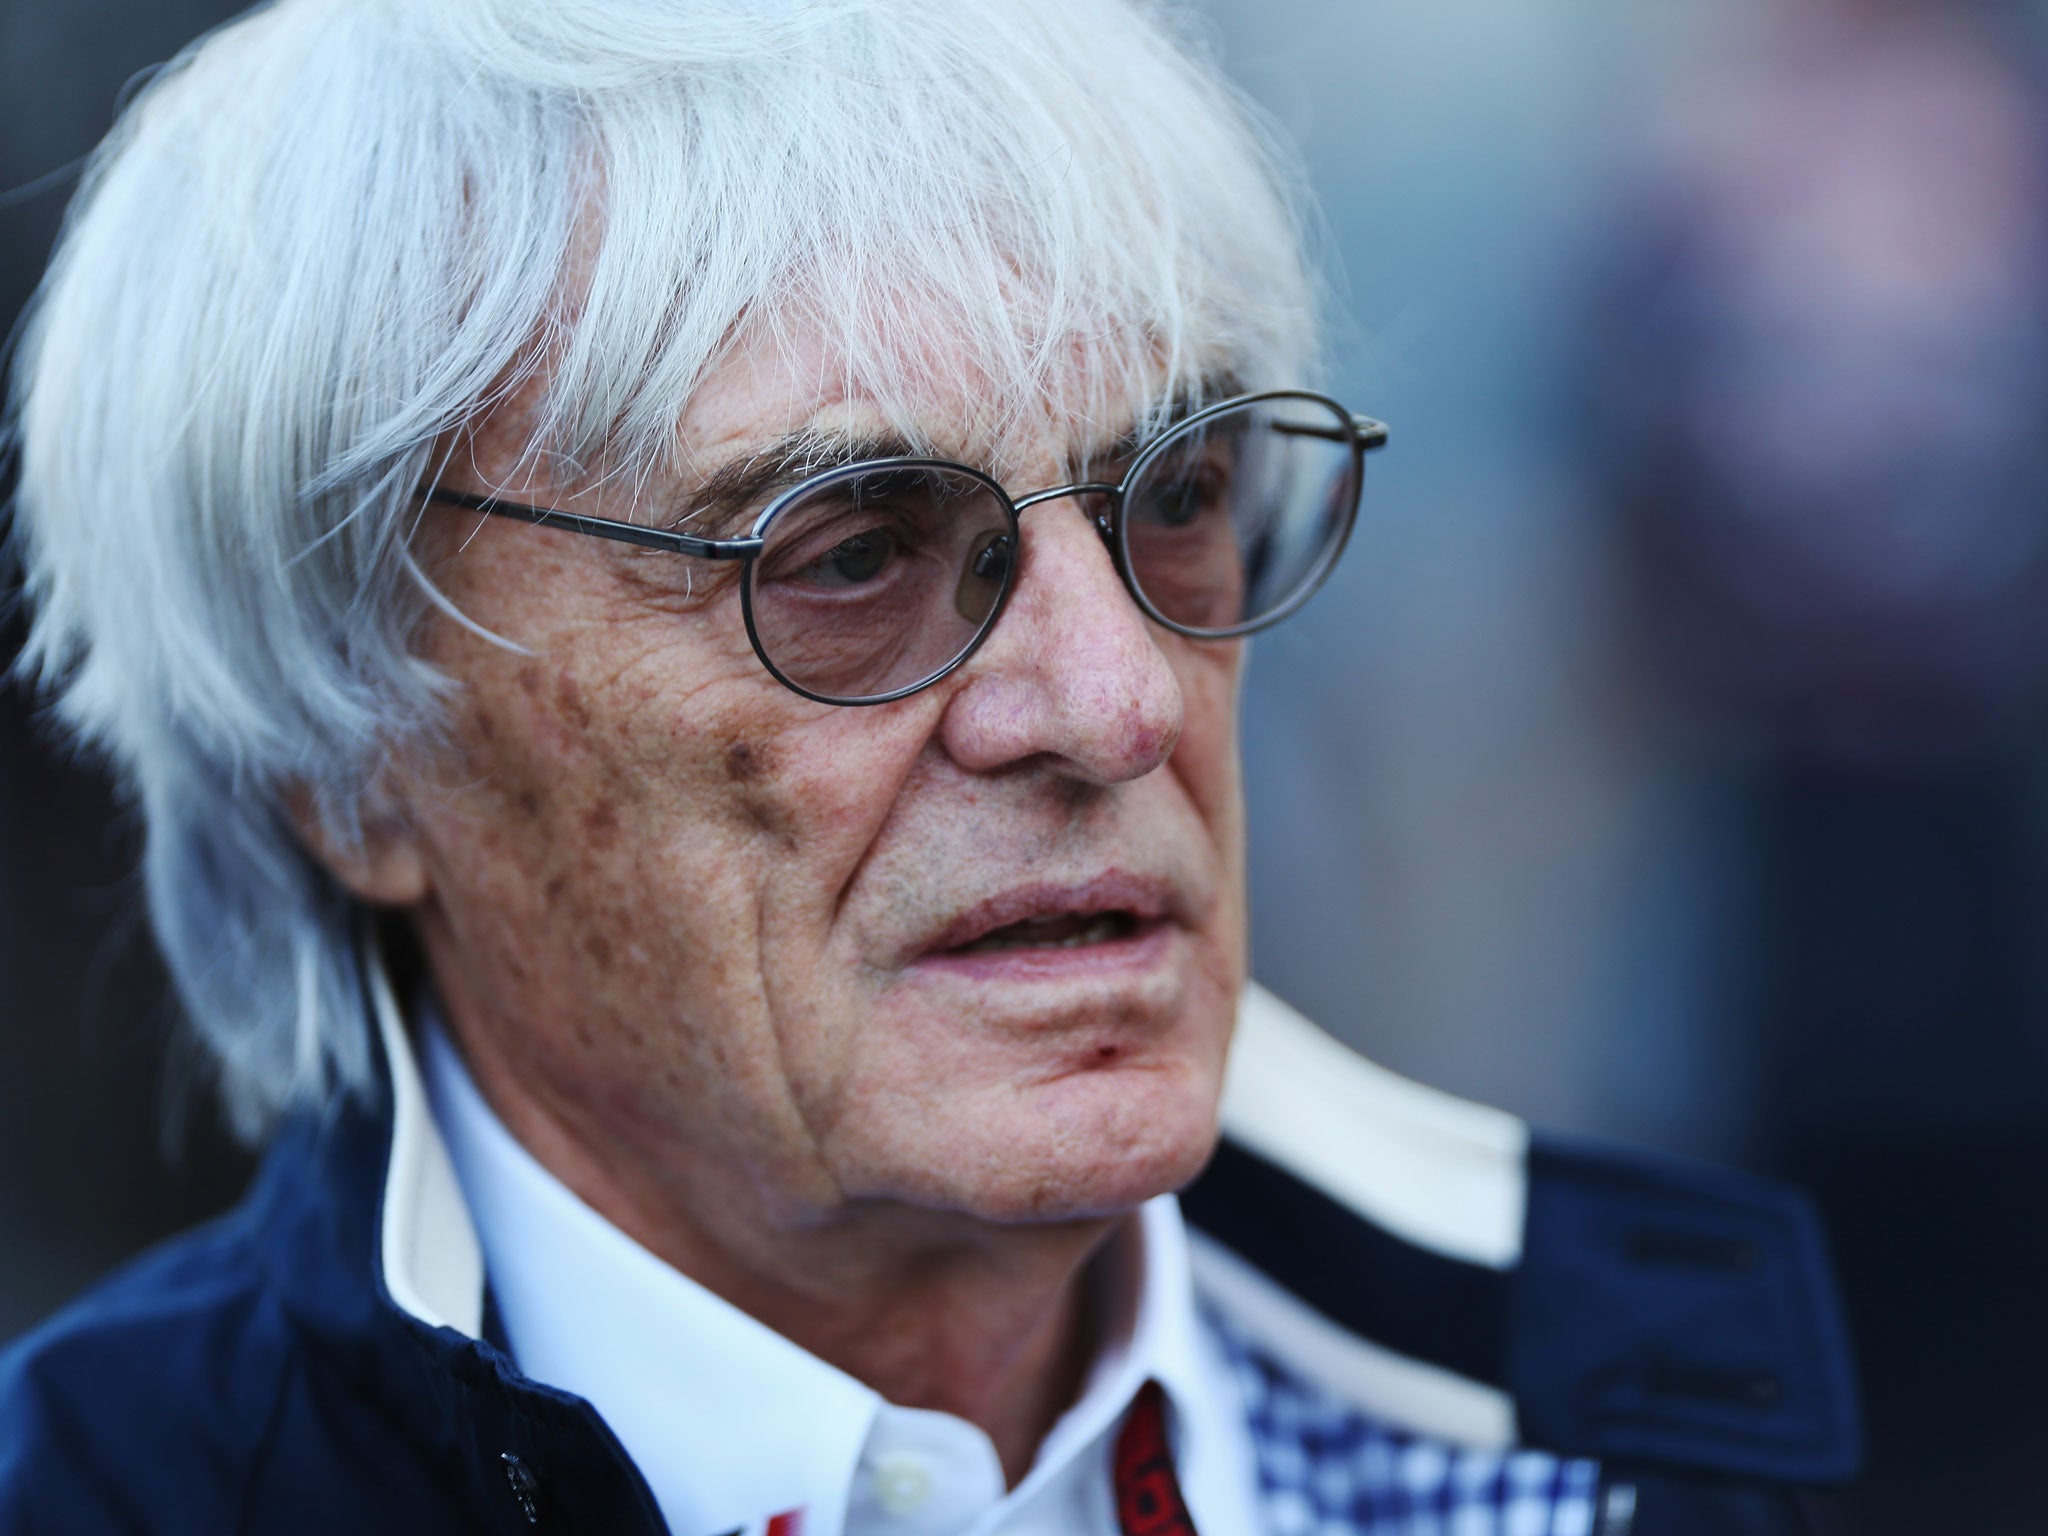 Formula 1 boss Bernie Ecclestone faces bribery charges, a German court has ruled.